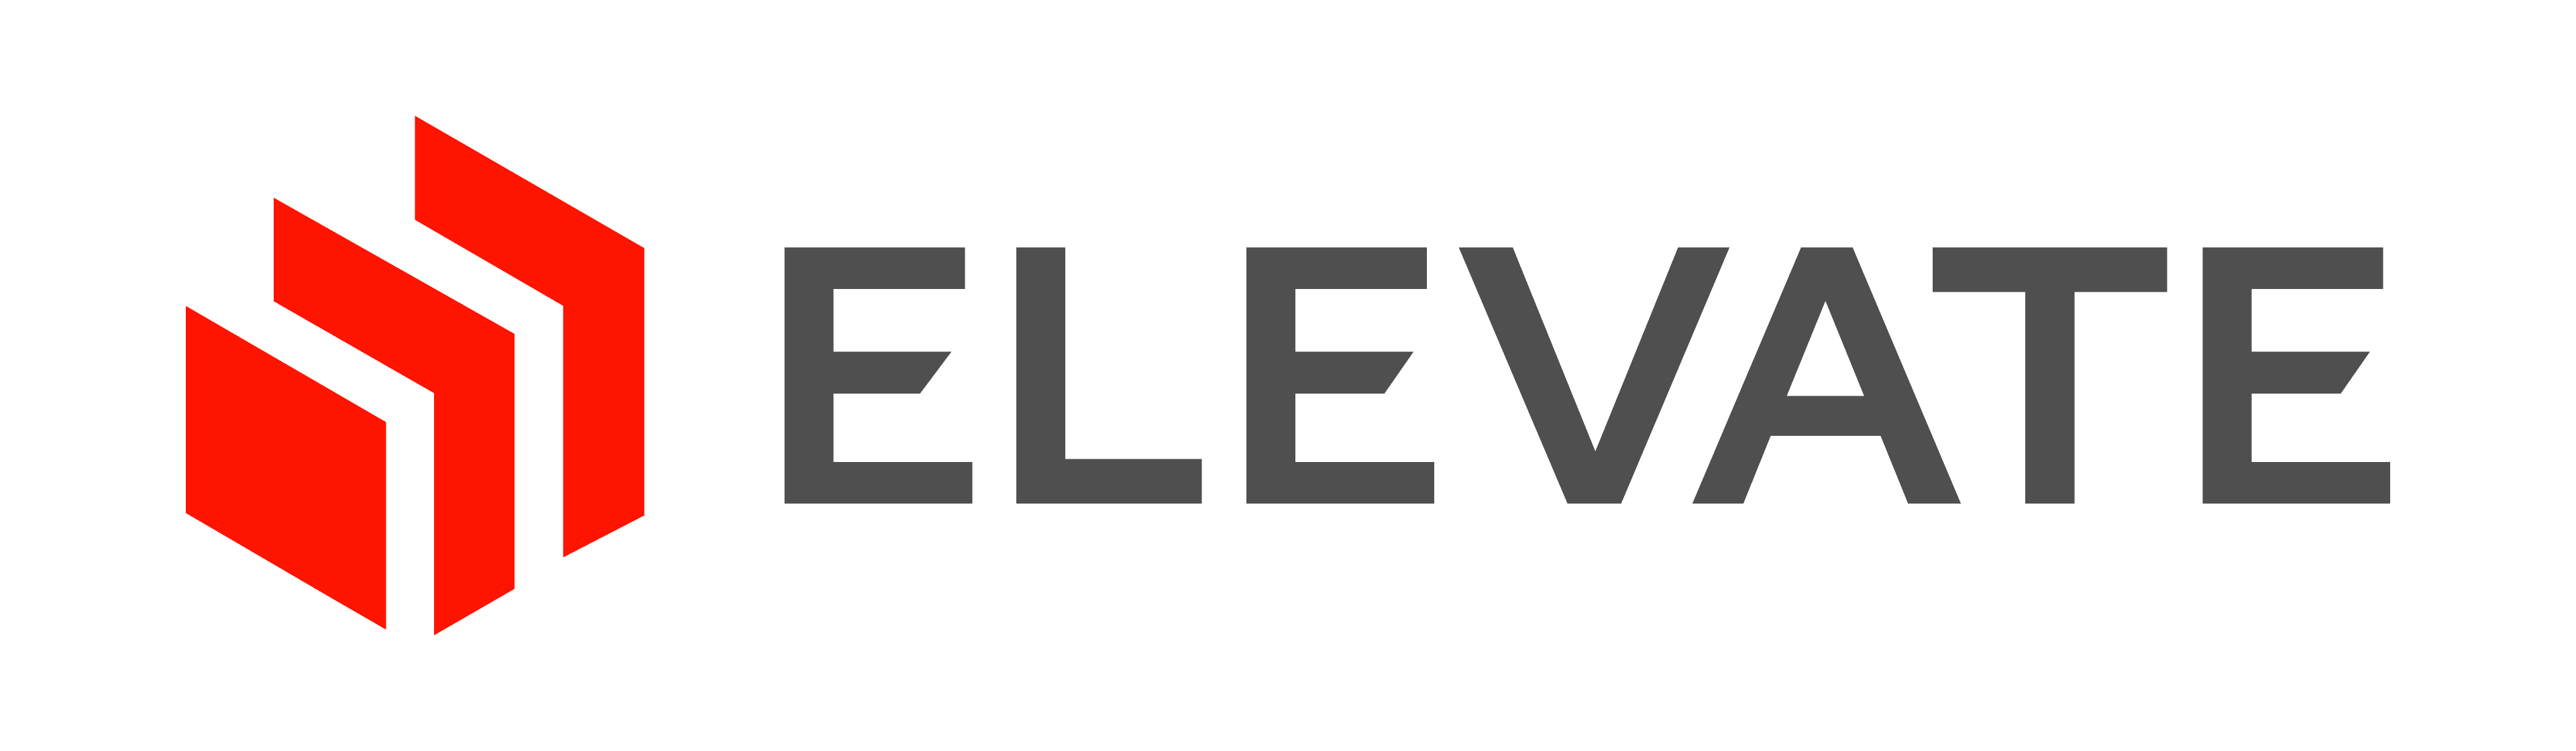 Elevate logo red